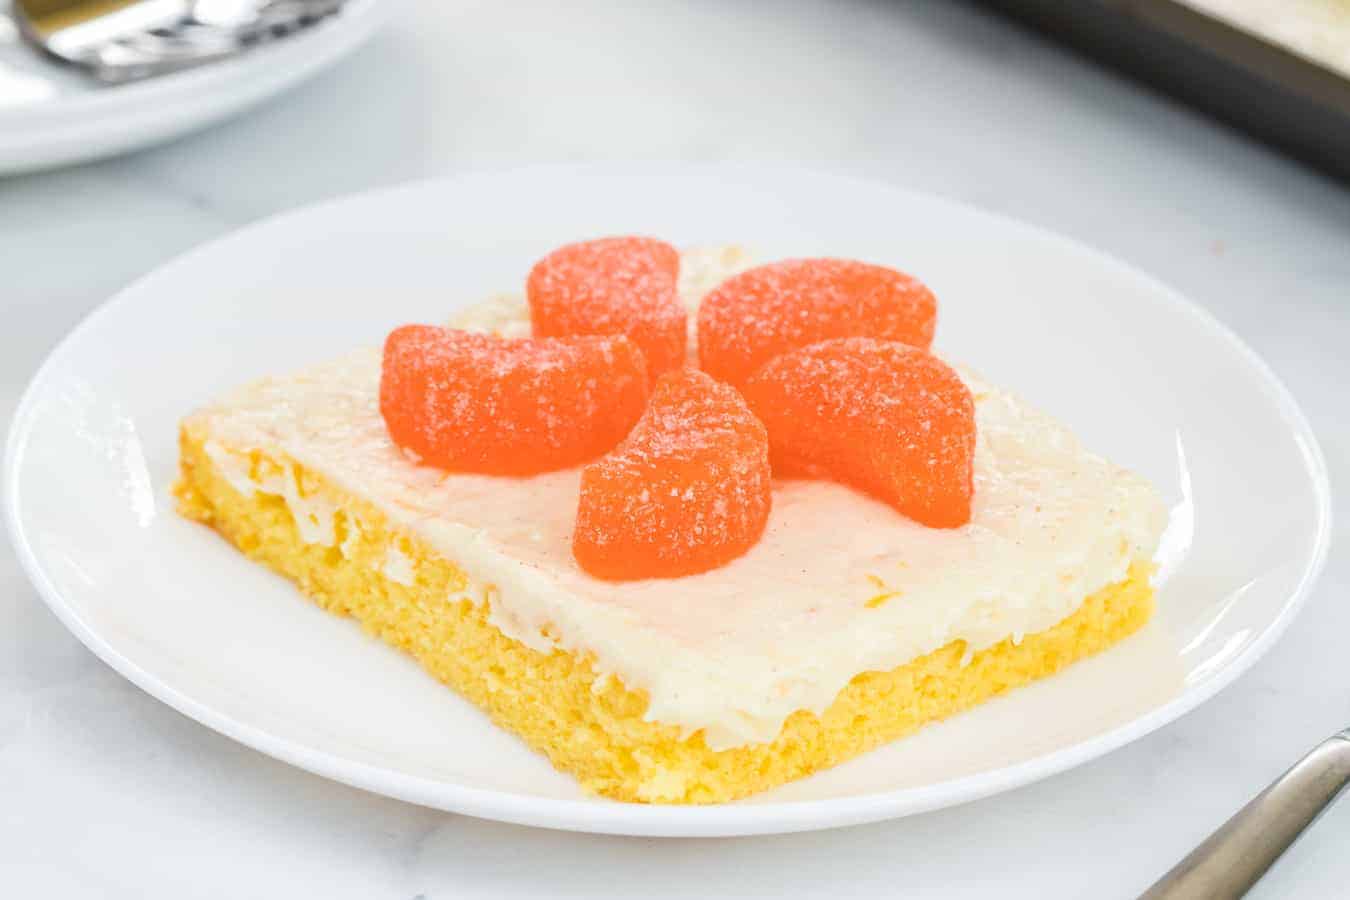 Fresh orange cake with orange vanilla bean icing is a vibrant and zesty sheet cake that's a breeze to whip up and even easier to enjoy. #orangecake #sheetcake #cake #baking #oranges #orangeicing